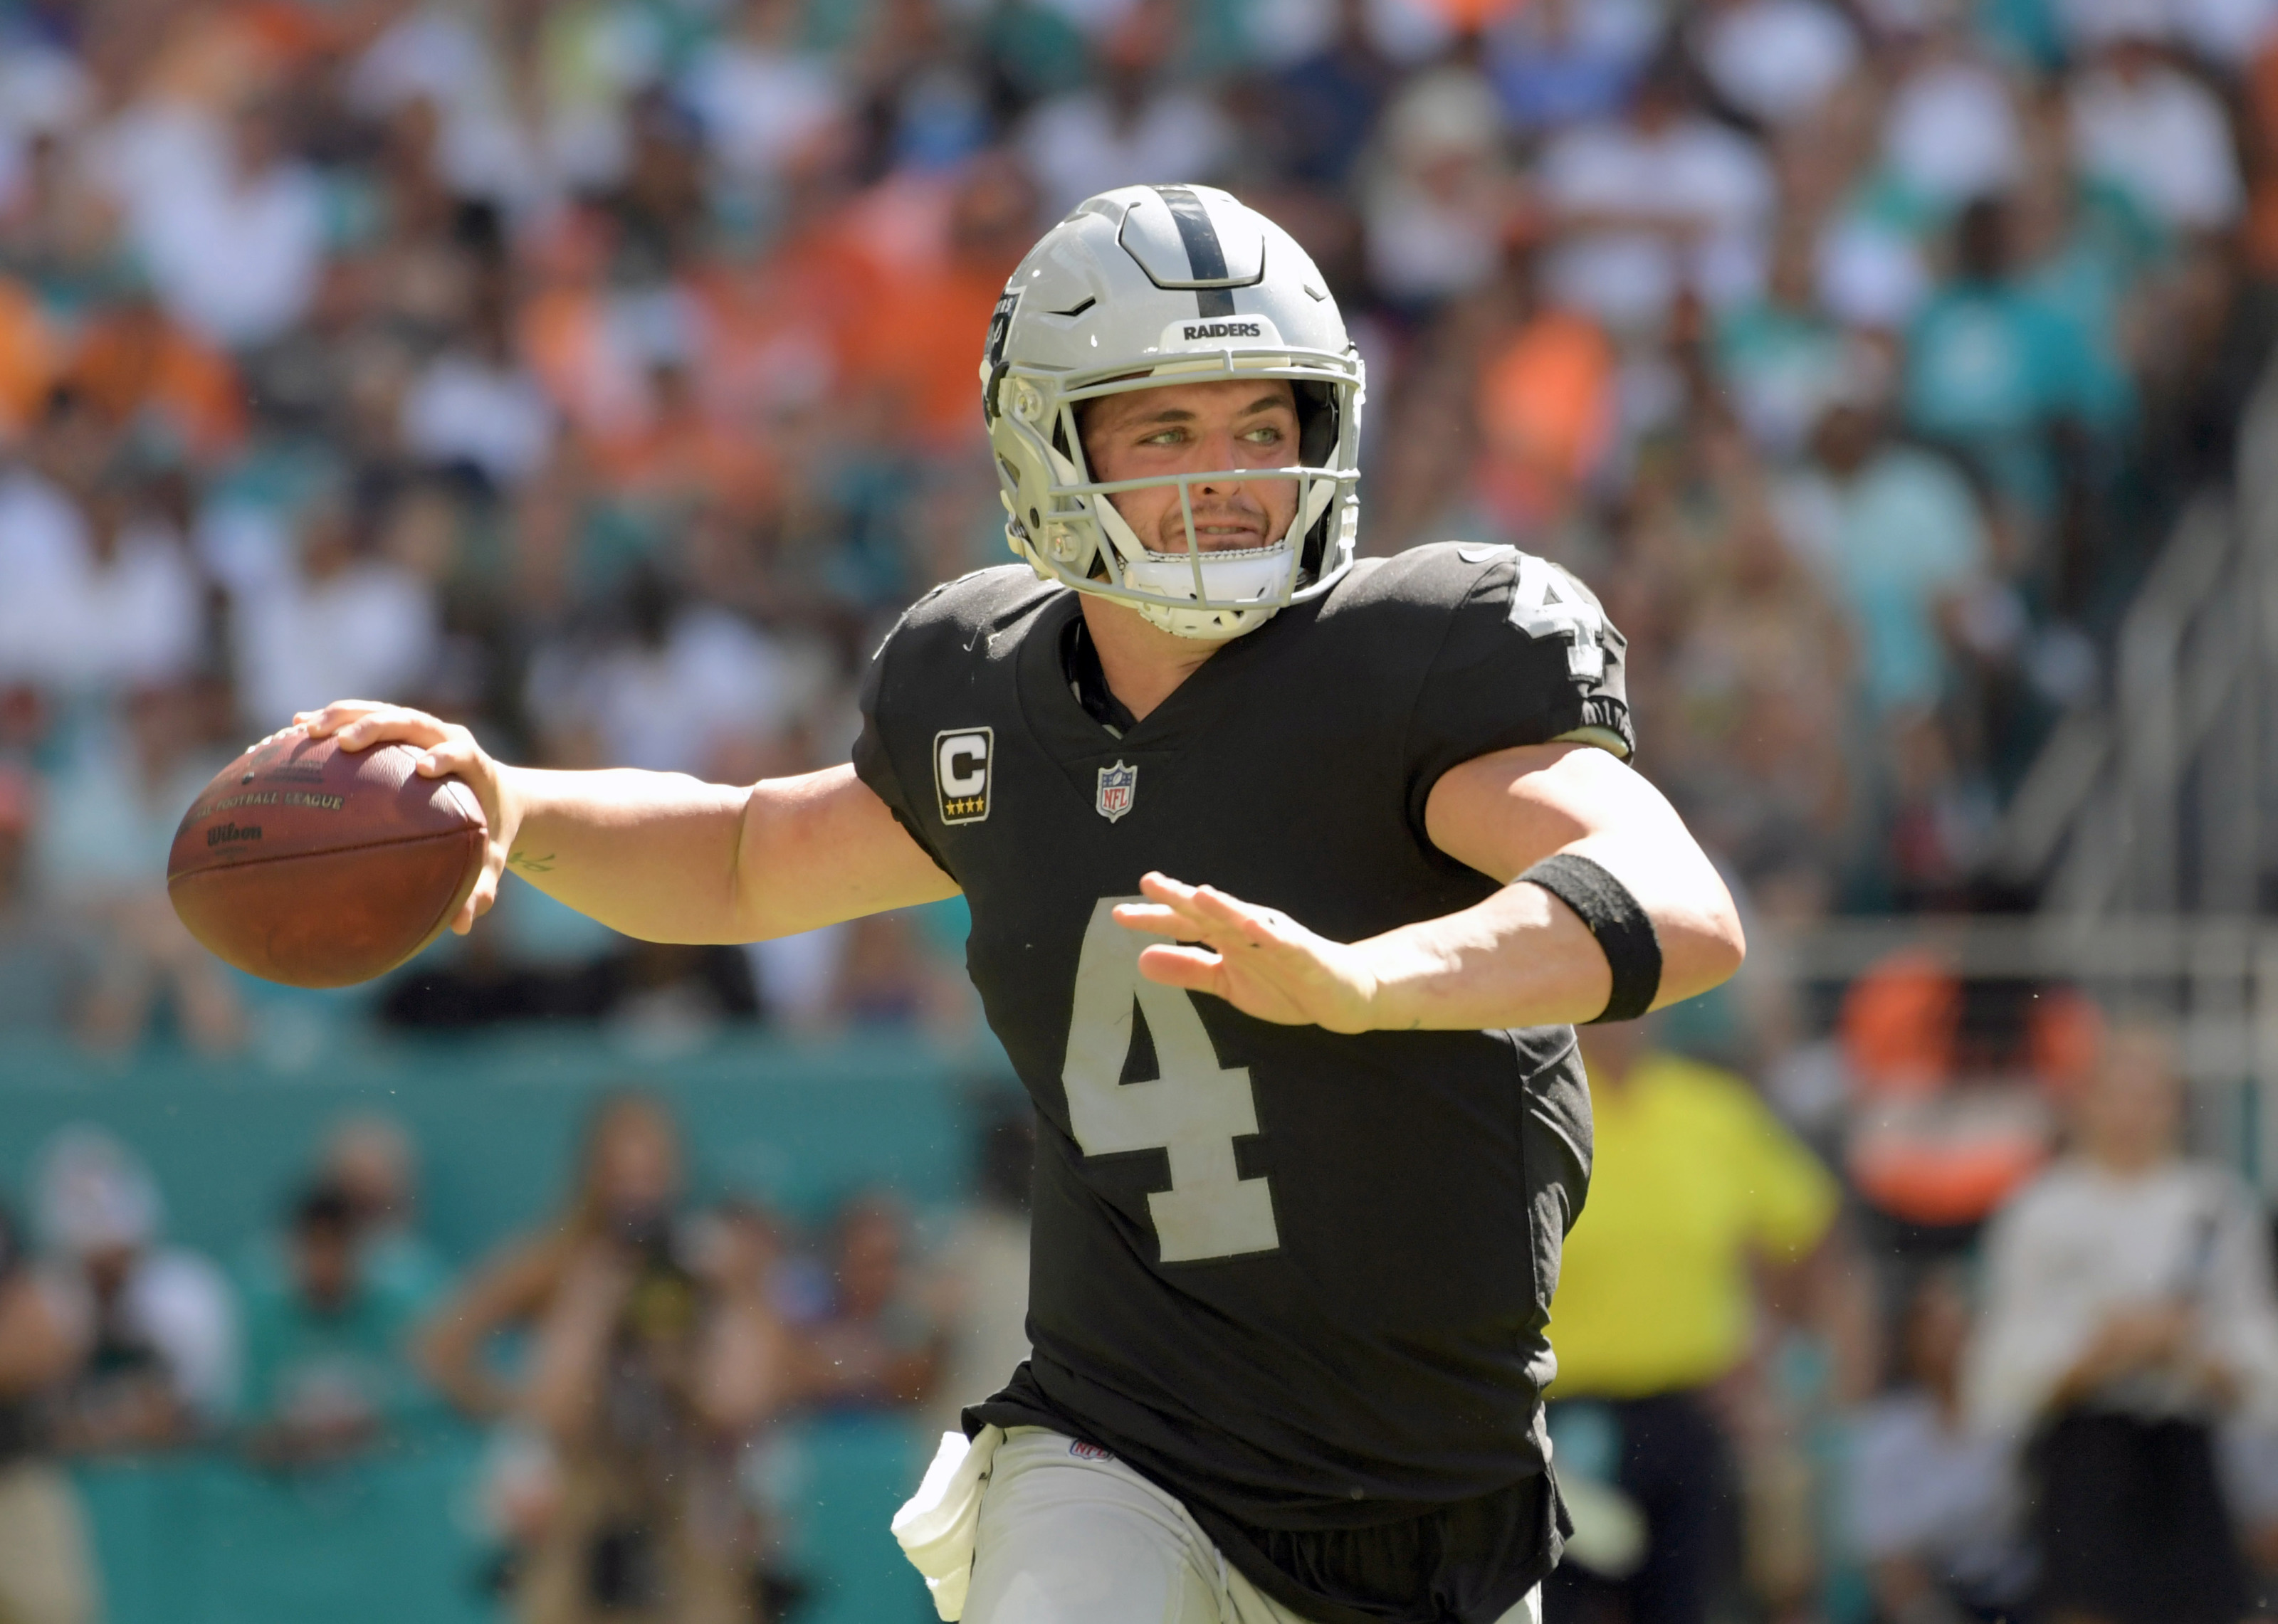 Raiders vs. Dolphins live stream: How to watch online and more